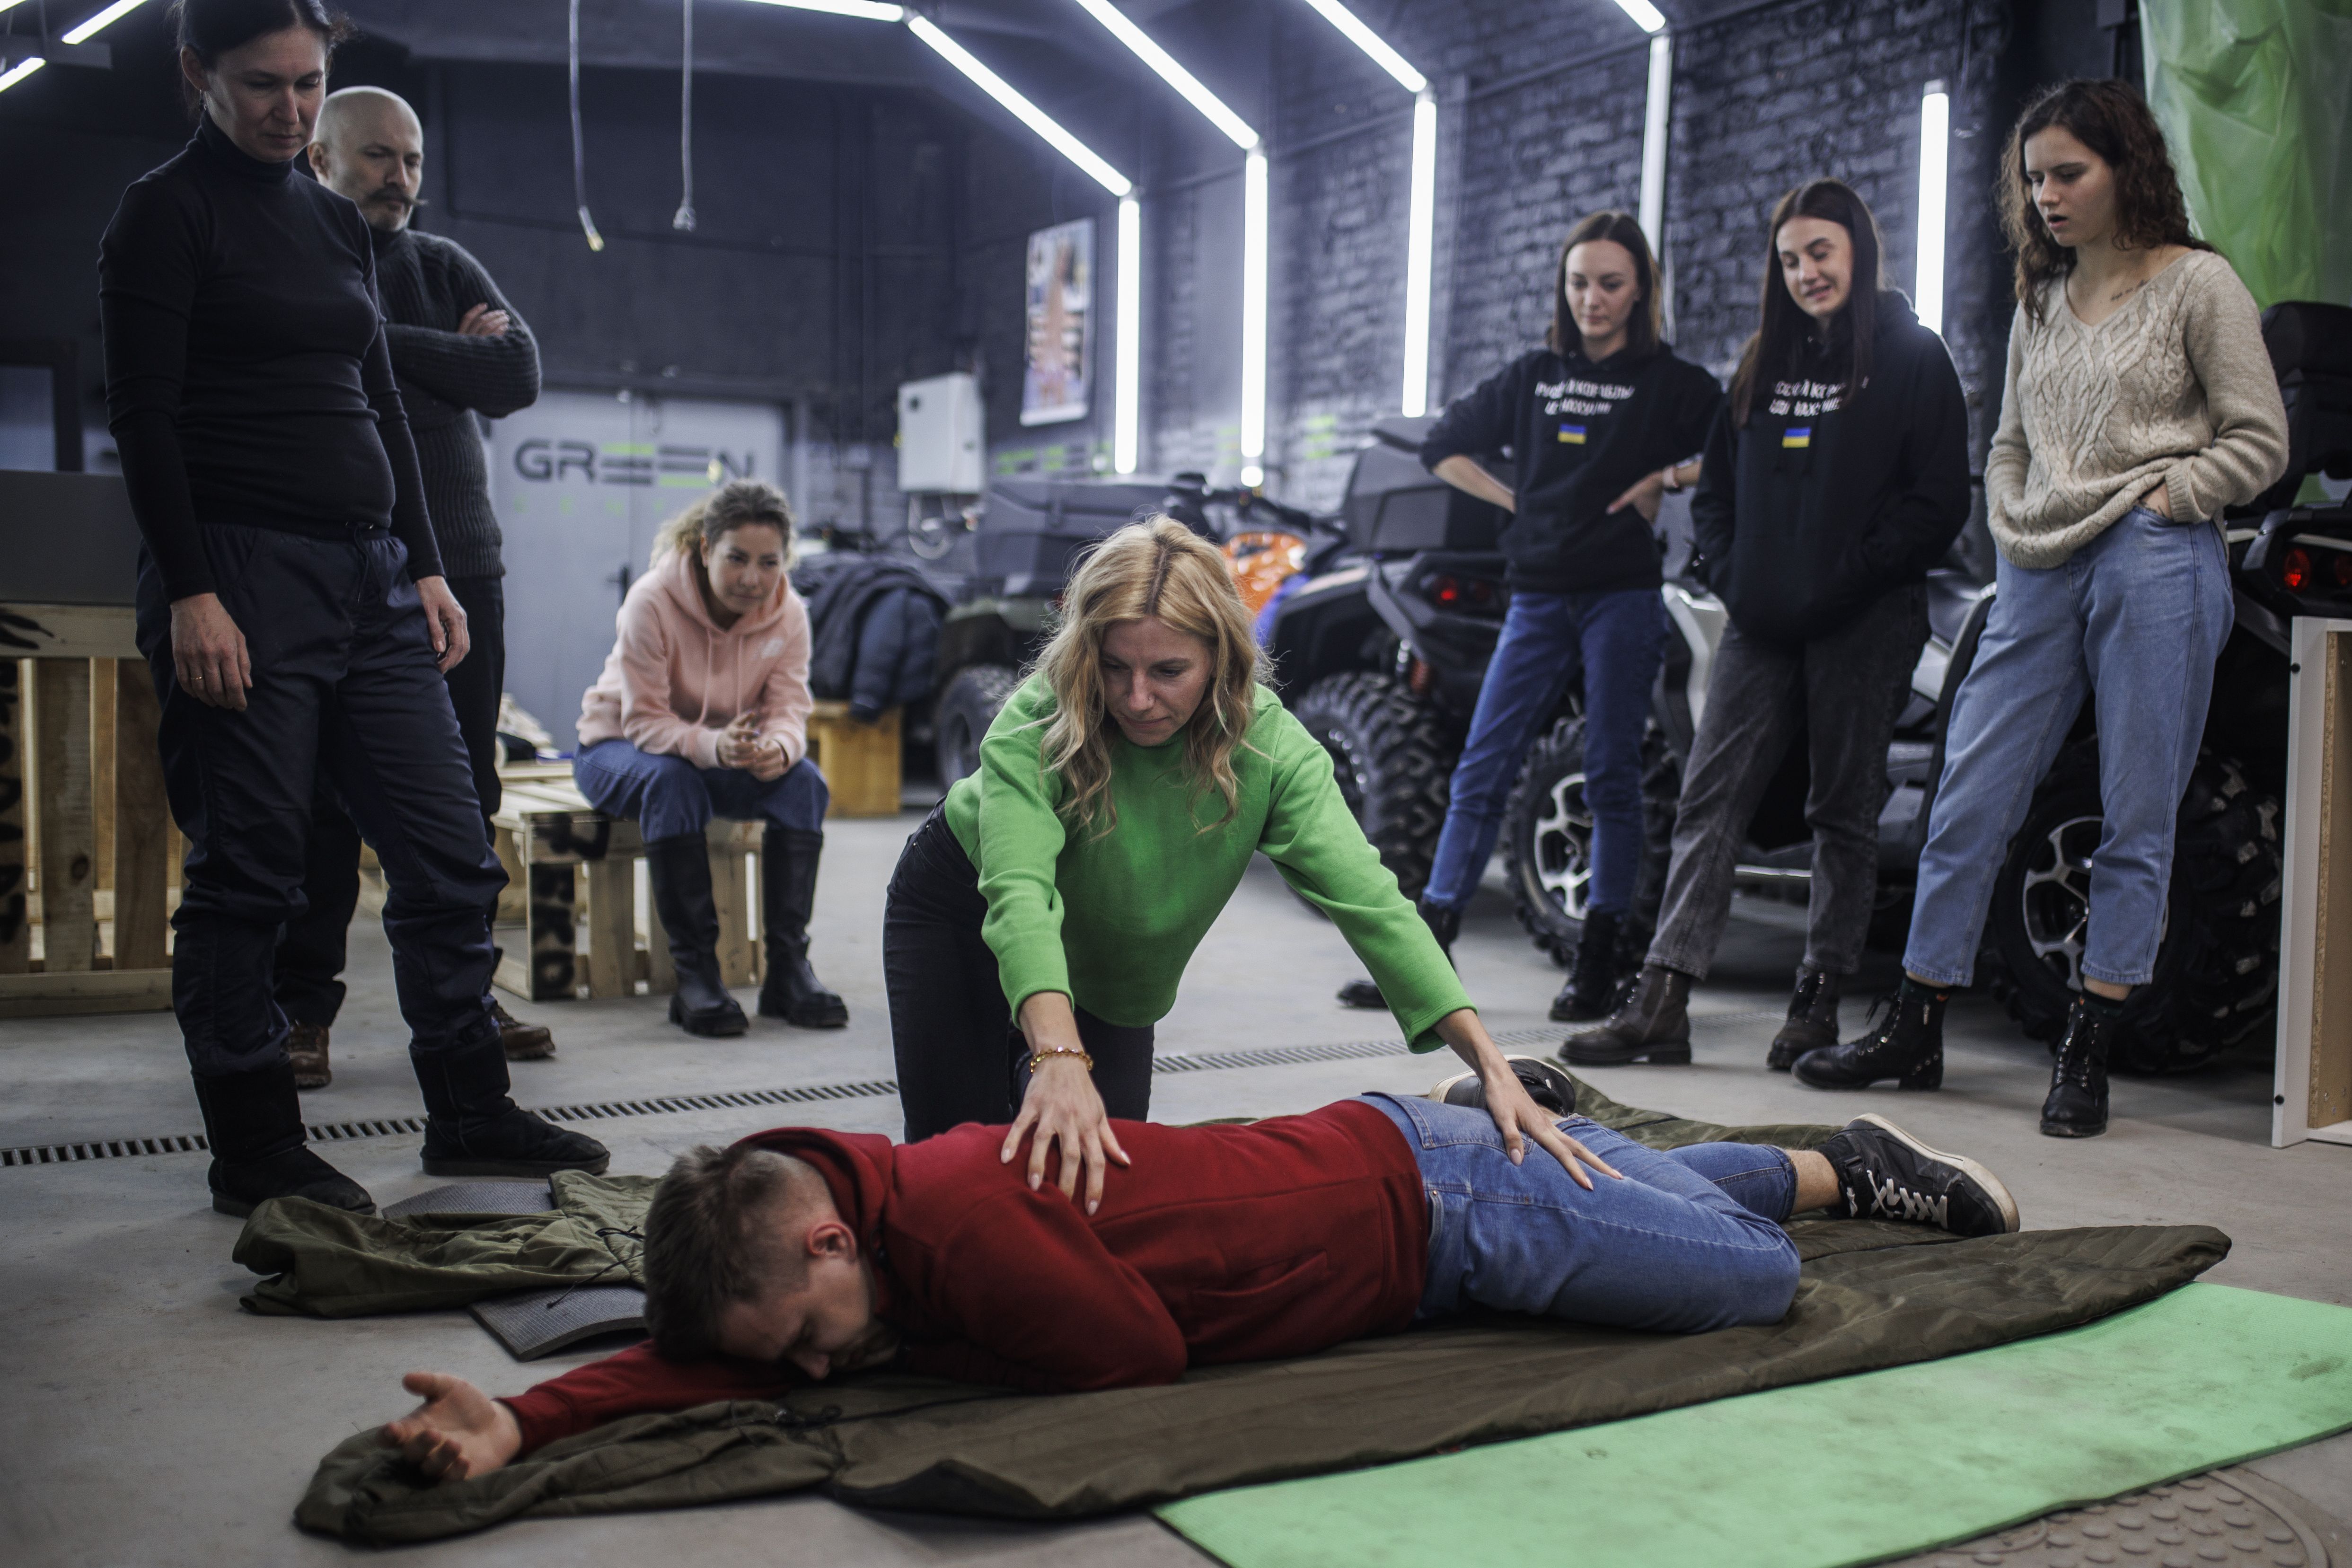 Ukrainians attend a first aid training at an underground room in Lviv, Ukraine amid Russian attacks on March 8.